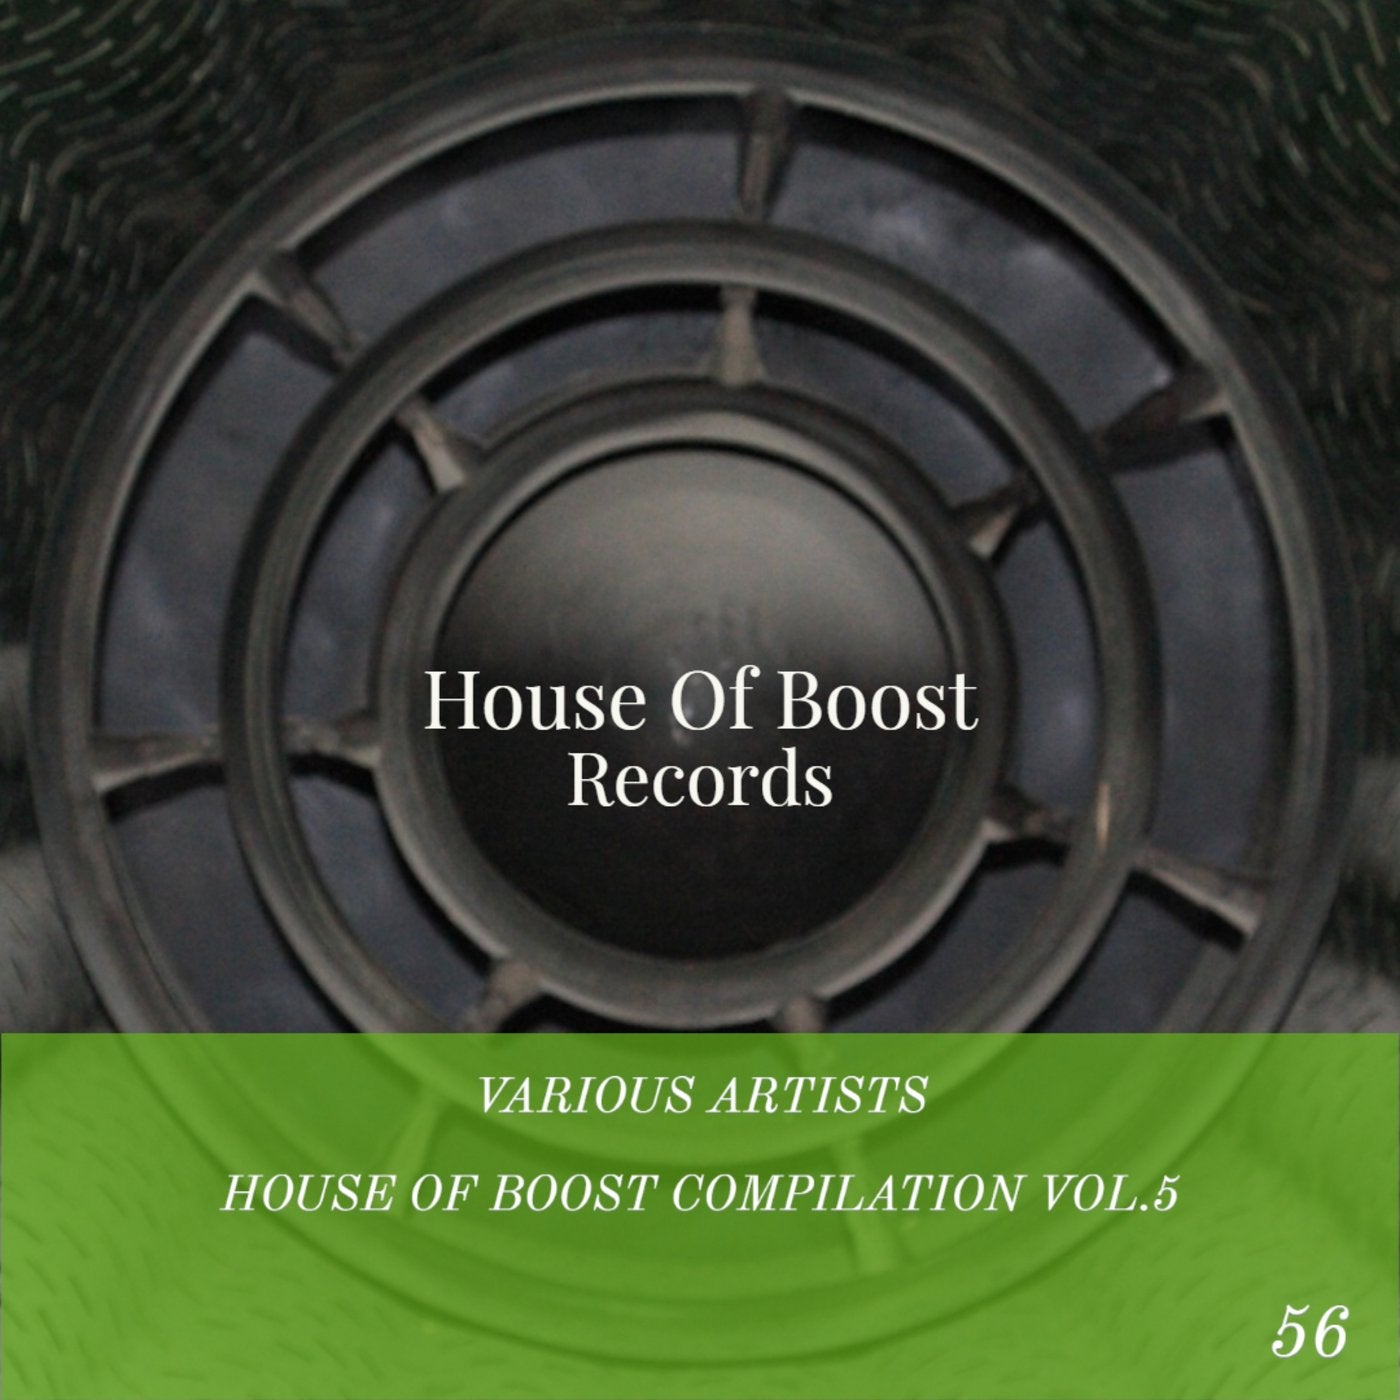 House Of Boost Compilation Vol.5